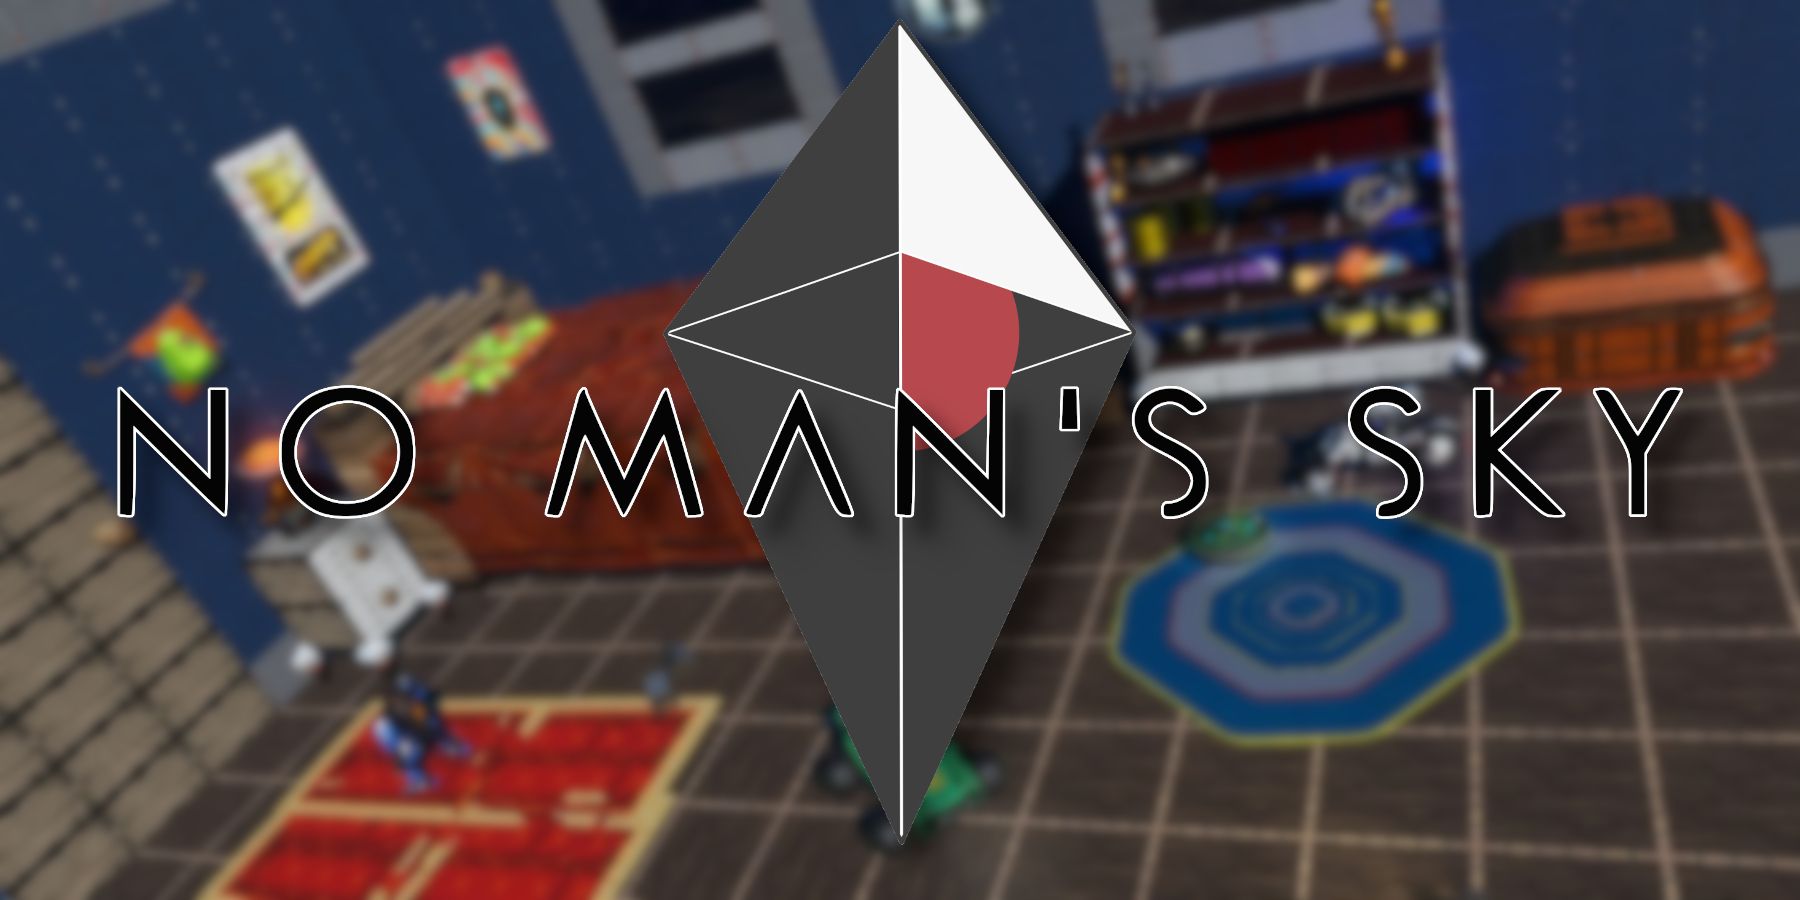 The No Man's Sky logo with a blurry image of the Toy Story bedroom.